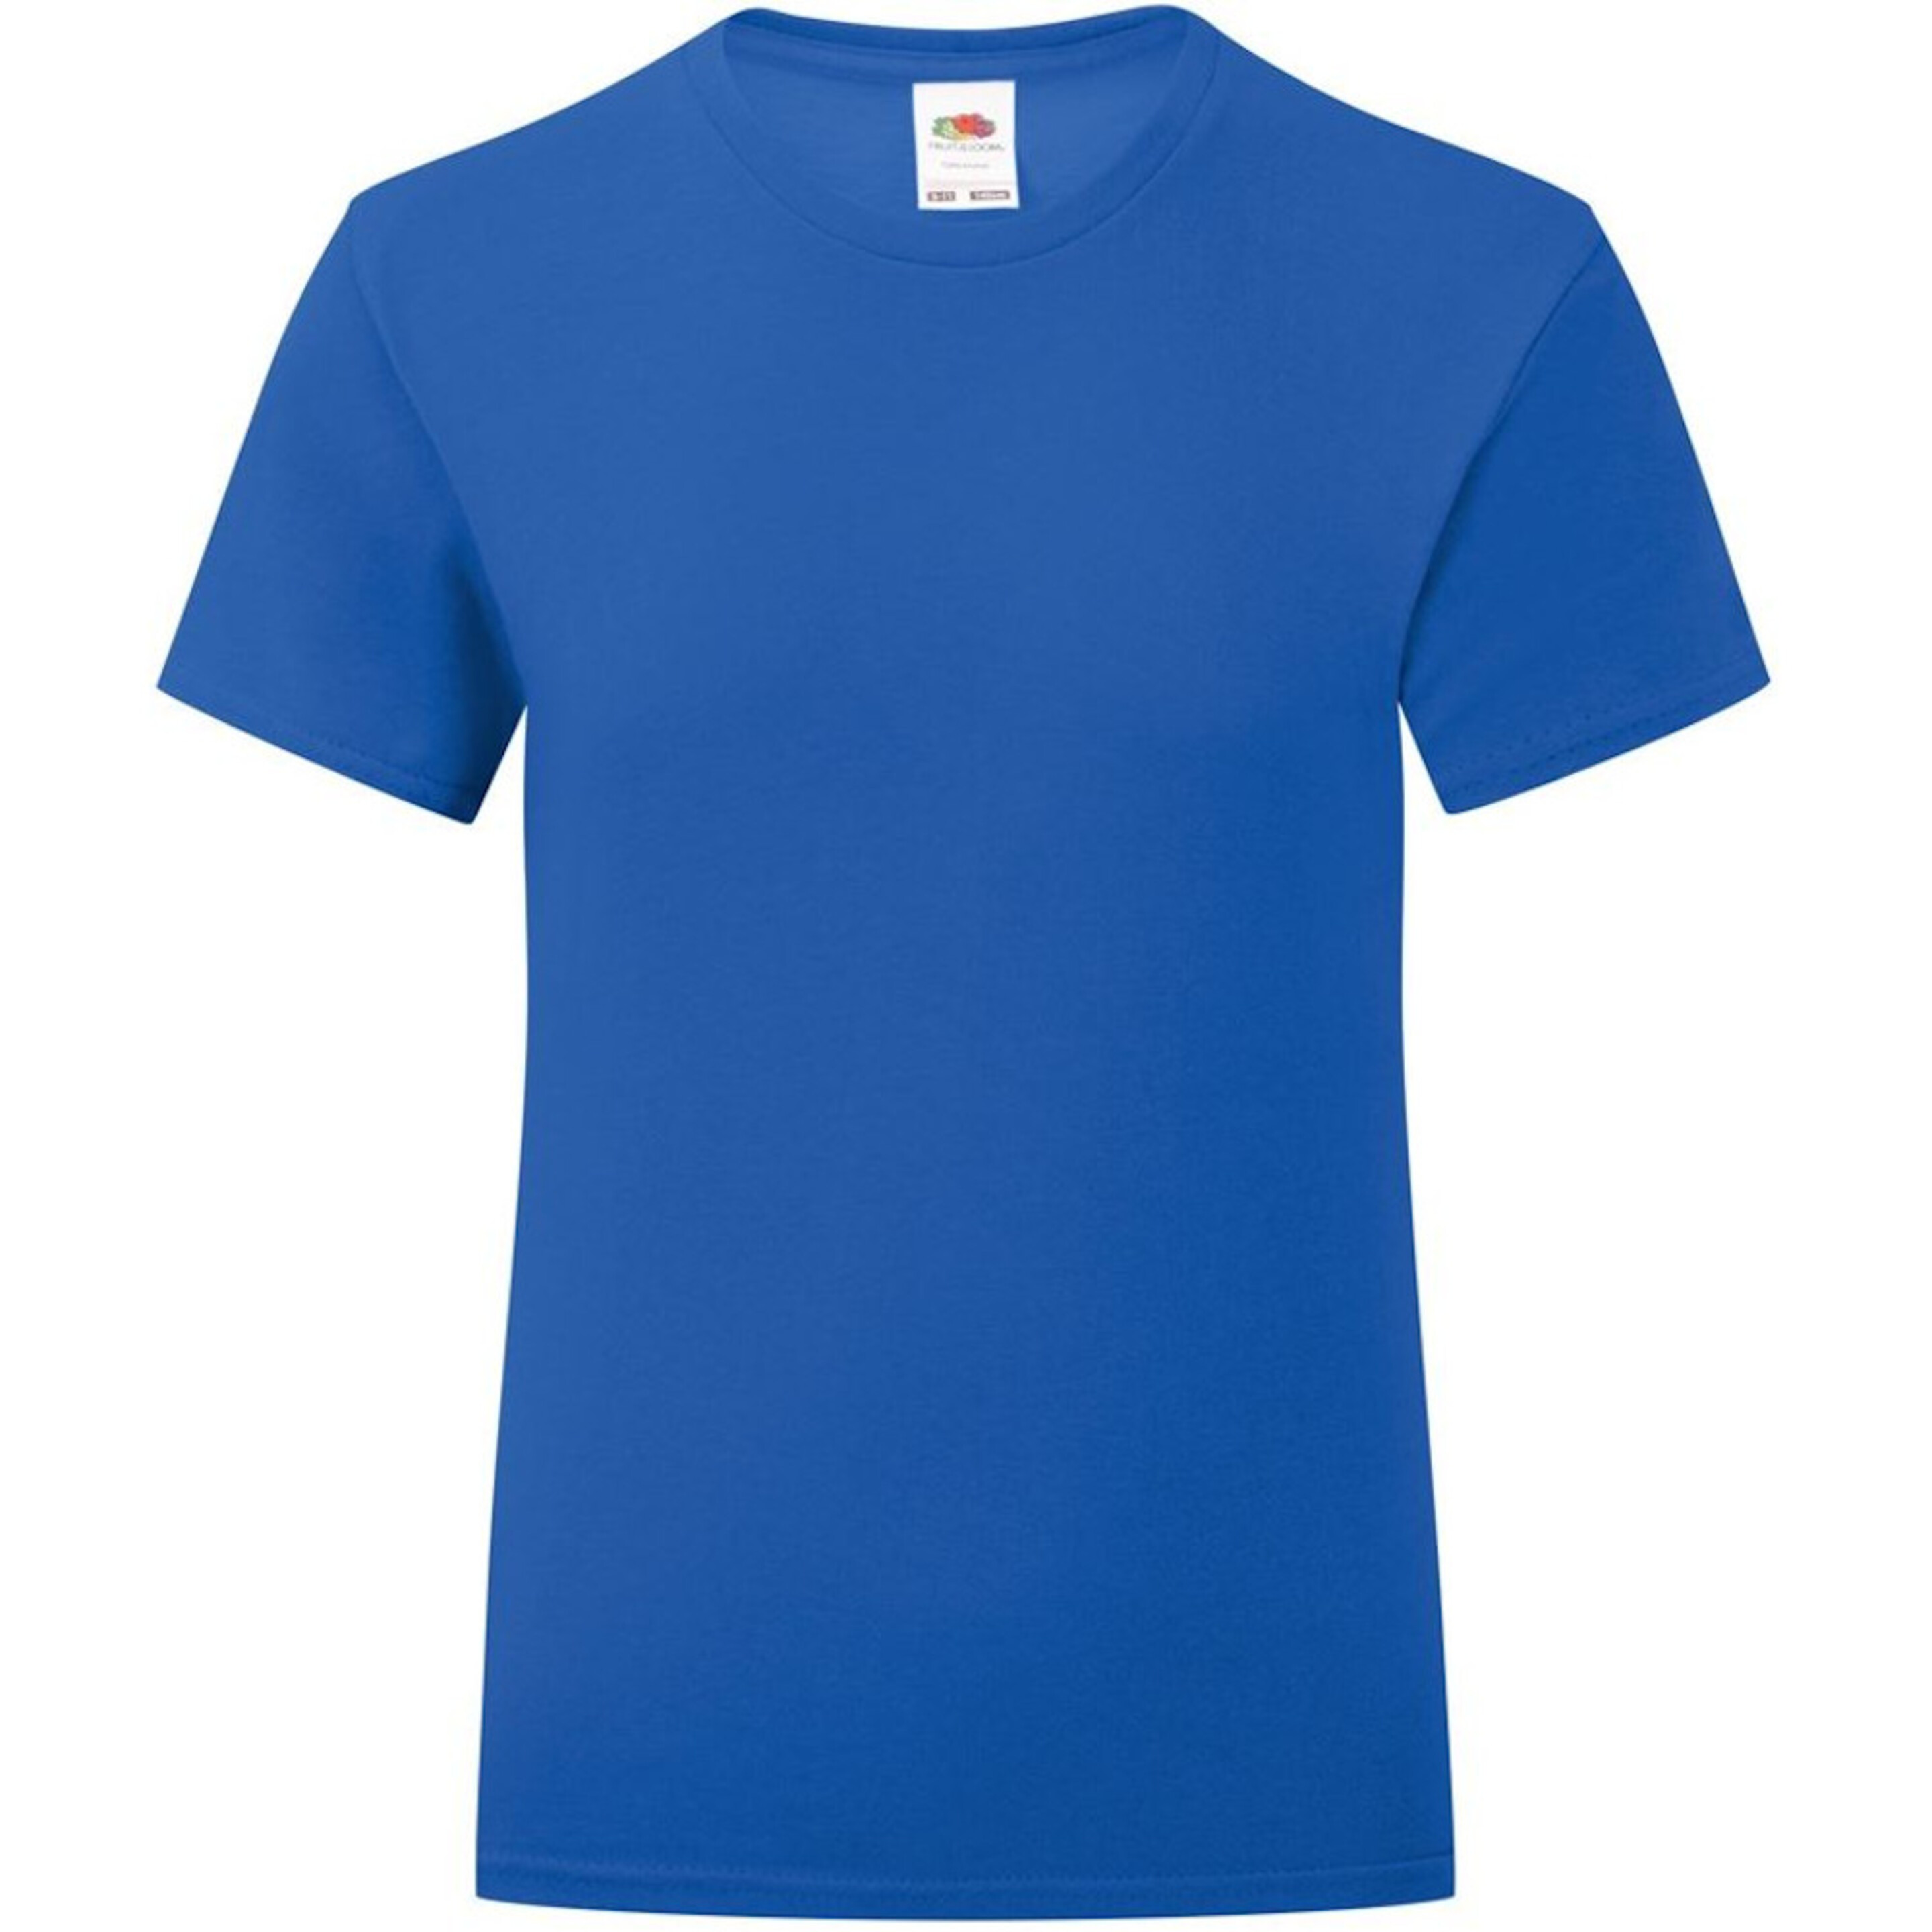 T-shirt Iconic Fruit Of The Loom - azul - 